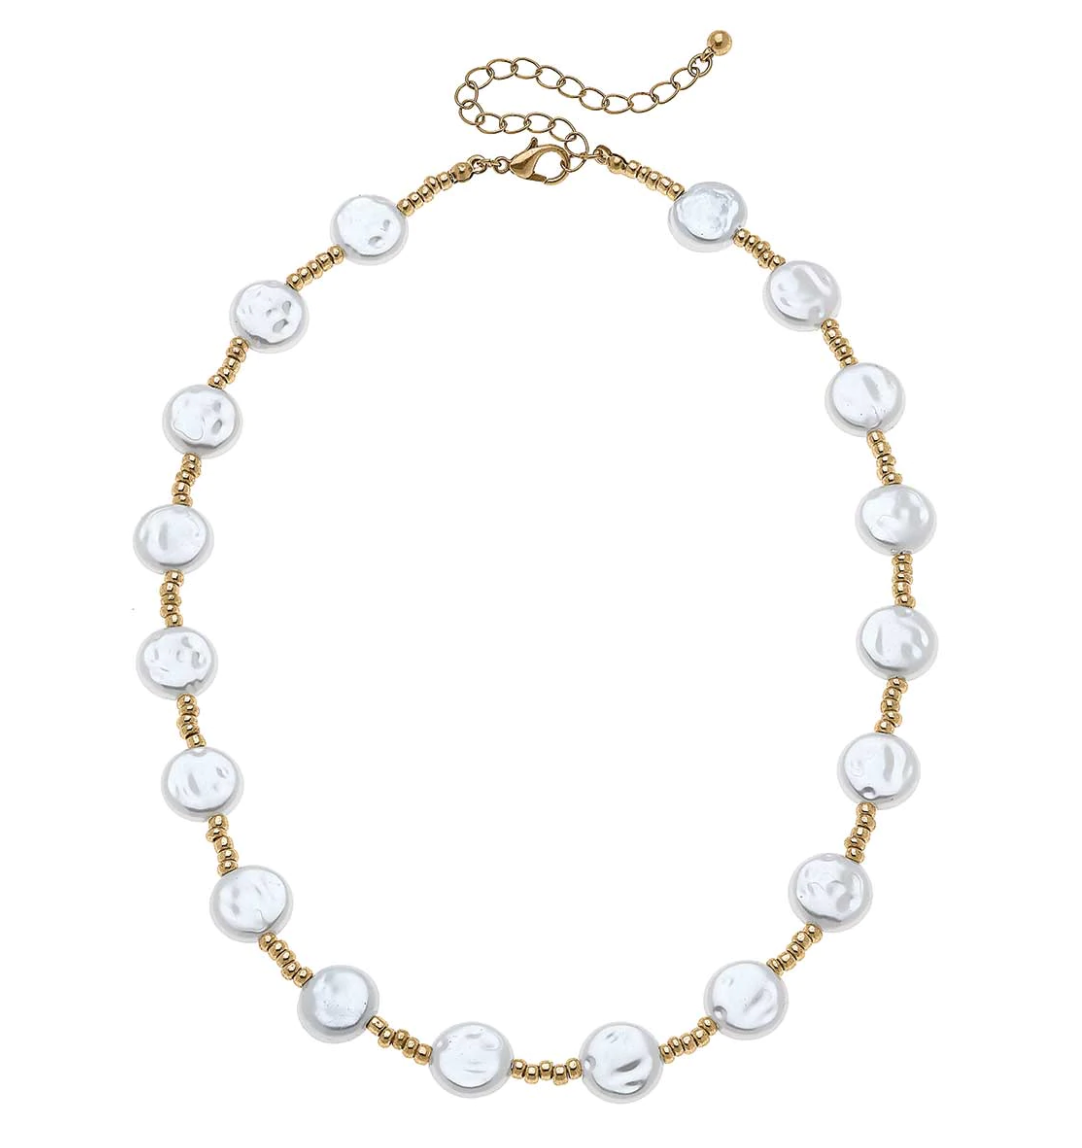 LEXINGTON COIN PEARL & SEED BEAD NECKLACE IN IVORY